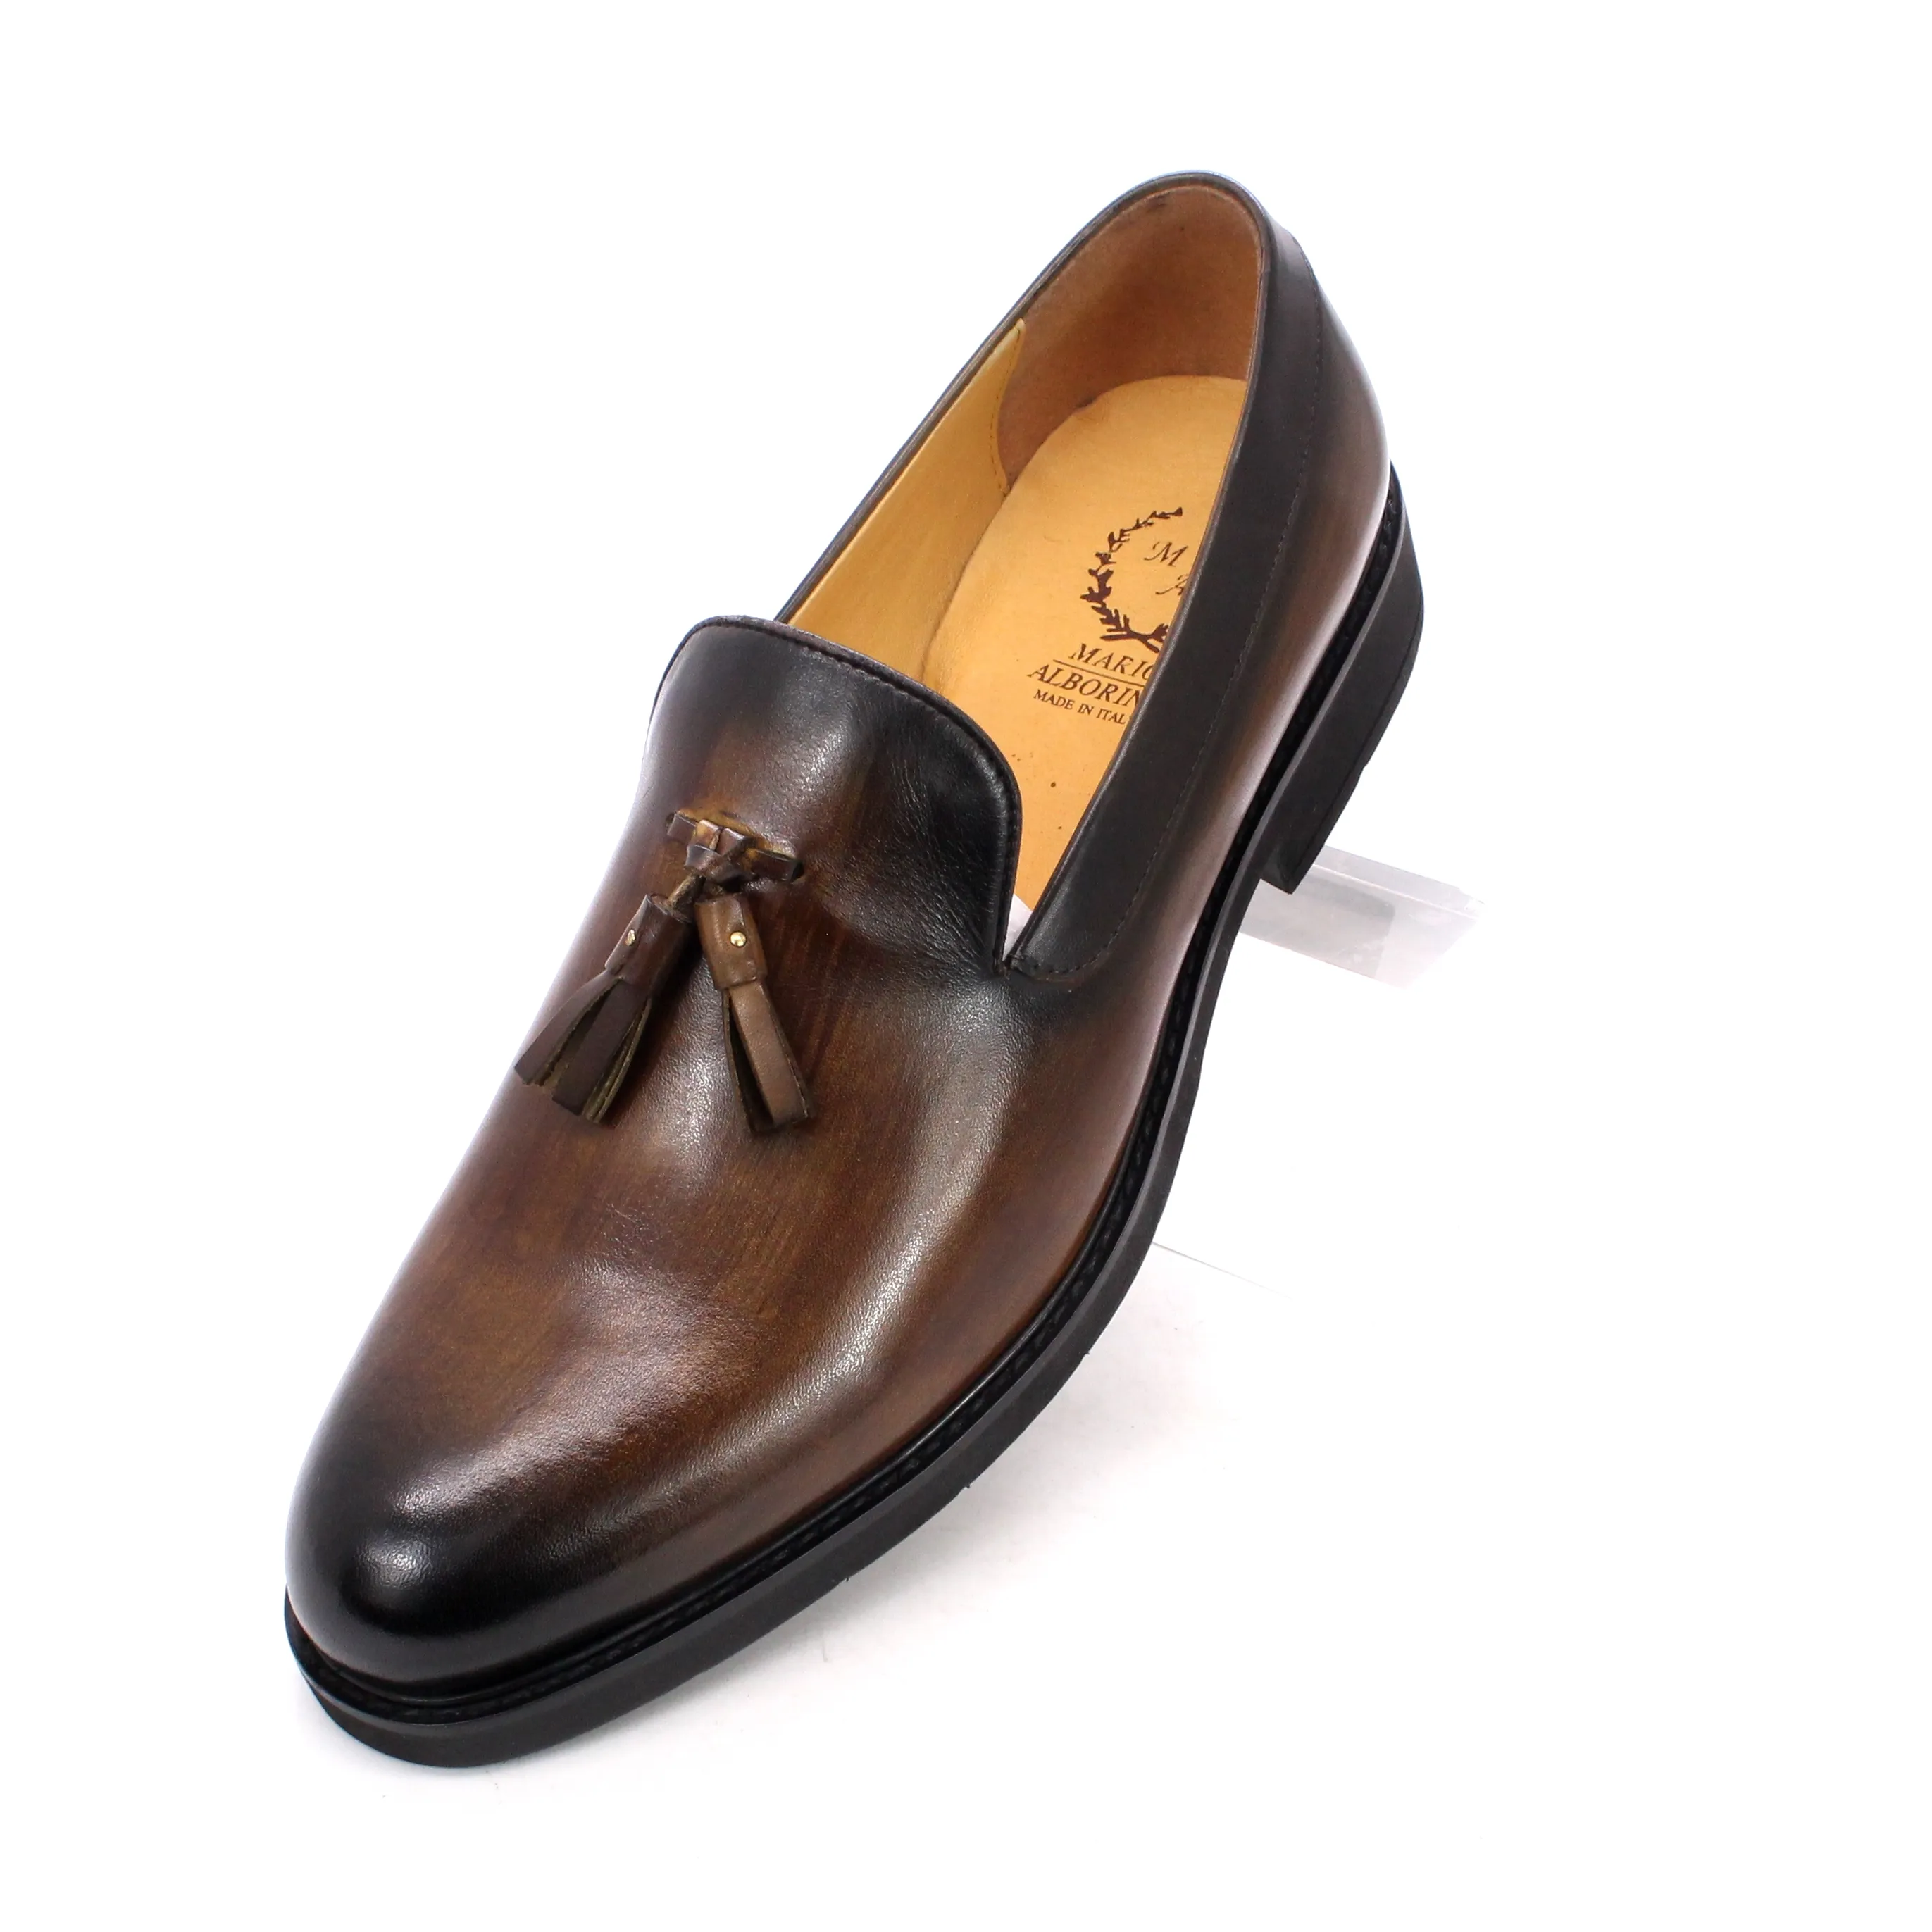 Brown Loafers With Tassel Genuine Leather Penny Loafers Thick Sole Men Casual Shoes